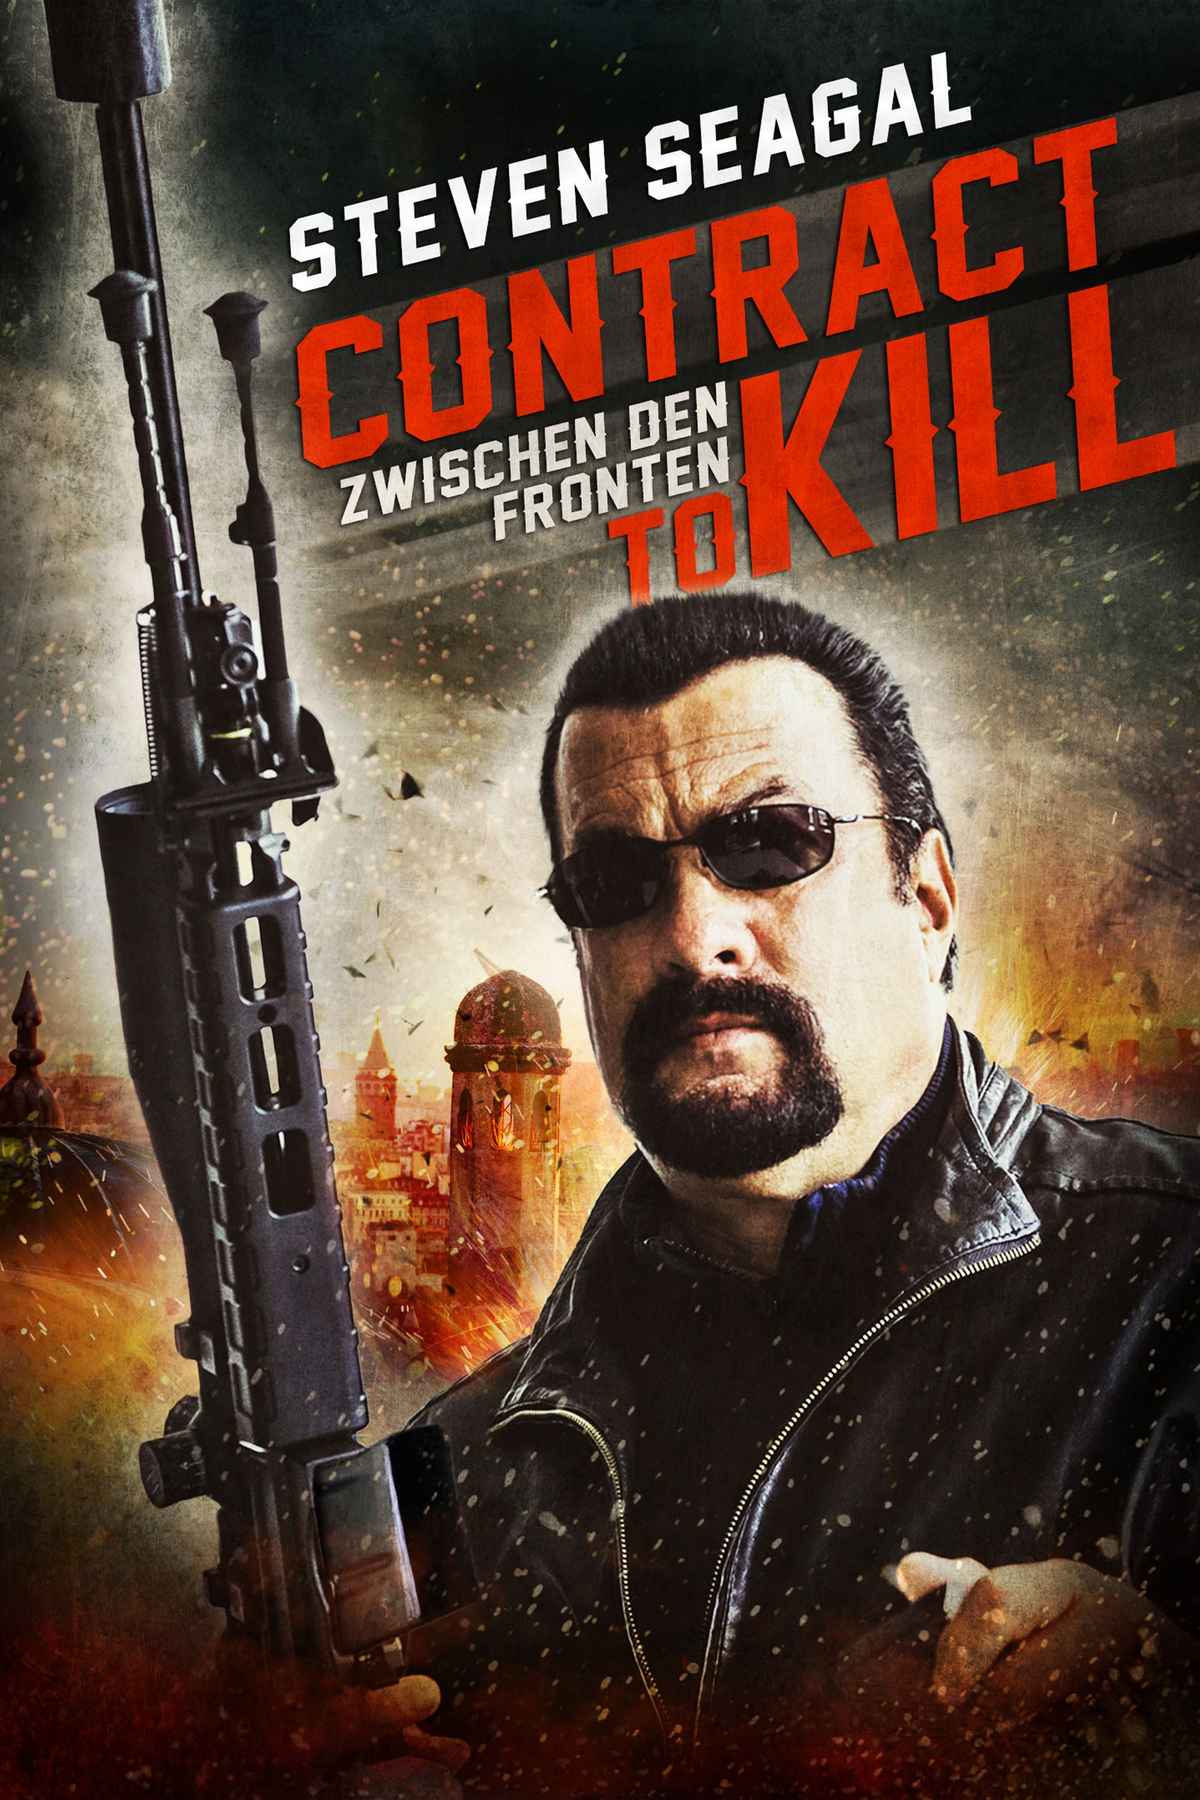 Steven Seagal Best Movies, TV Shows and Web Series List